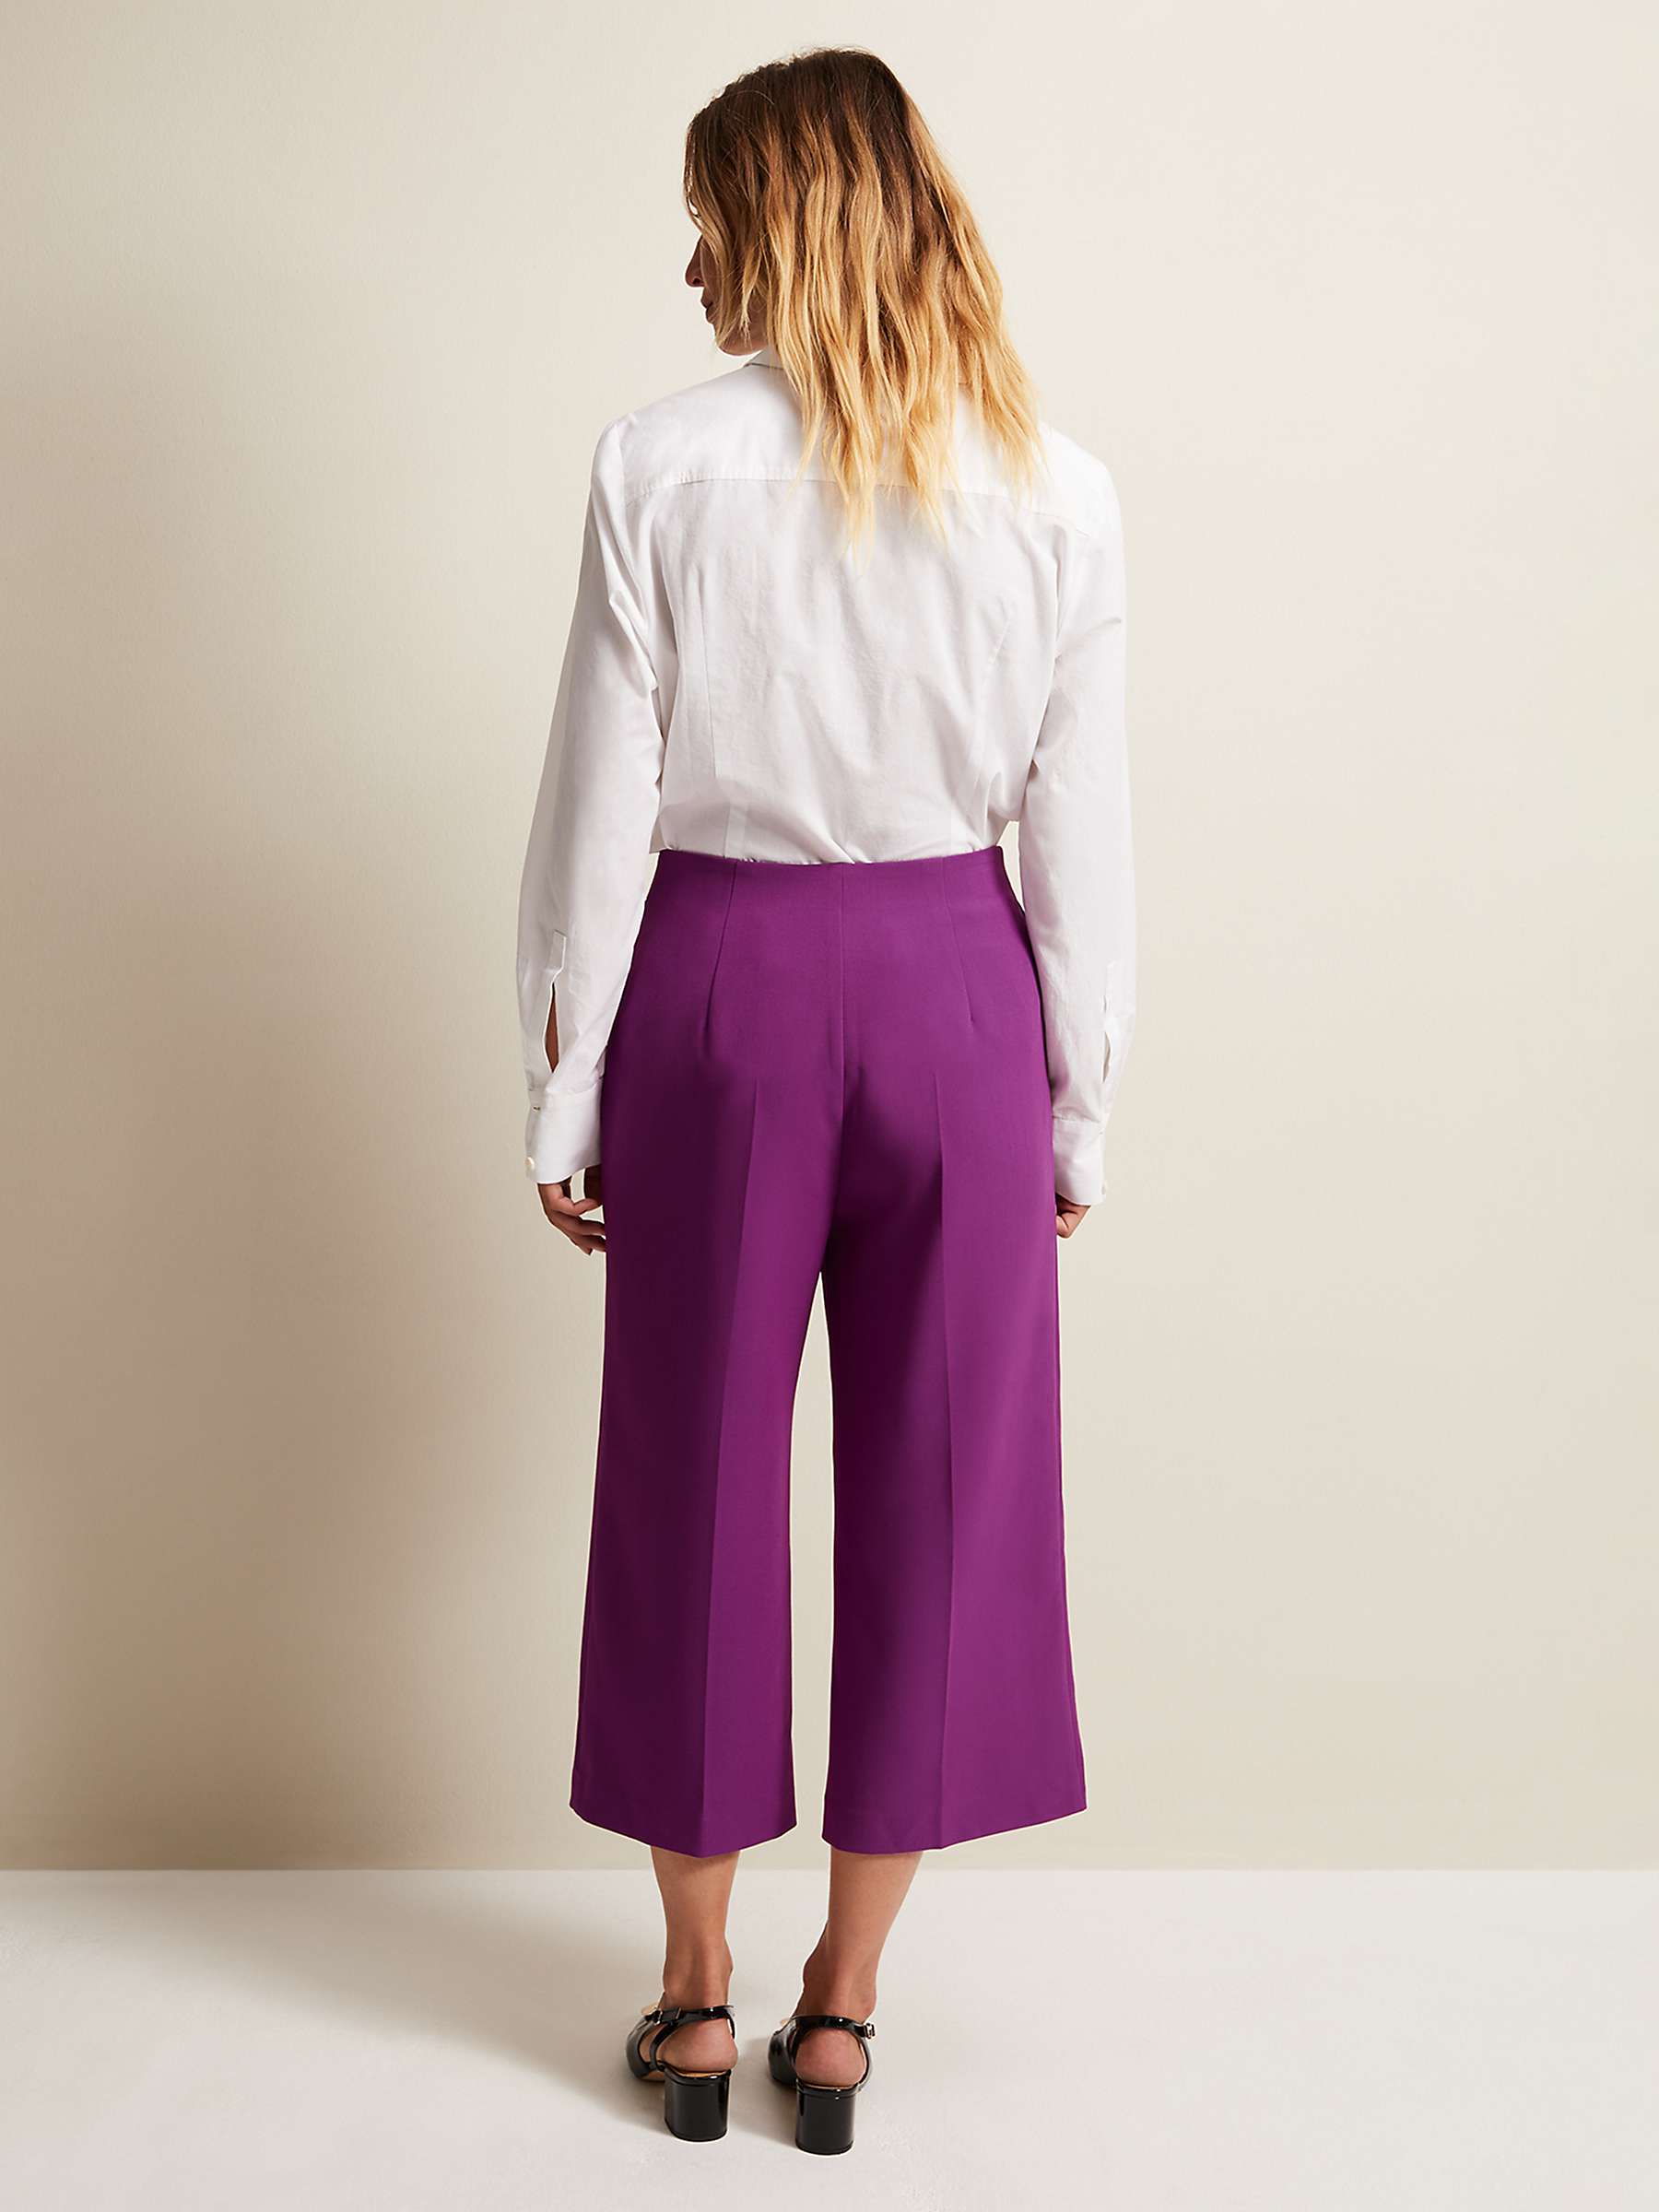 Buy Phase Eight Aubrielle Clean Crepe Culotte Online at johnlewis.com